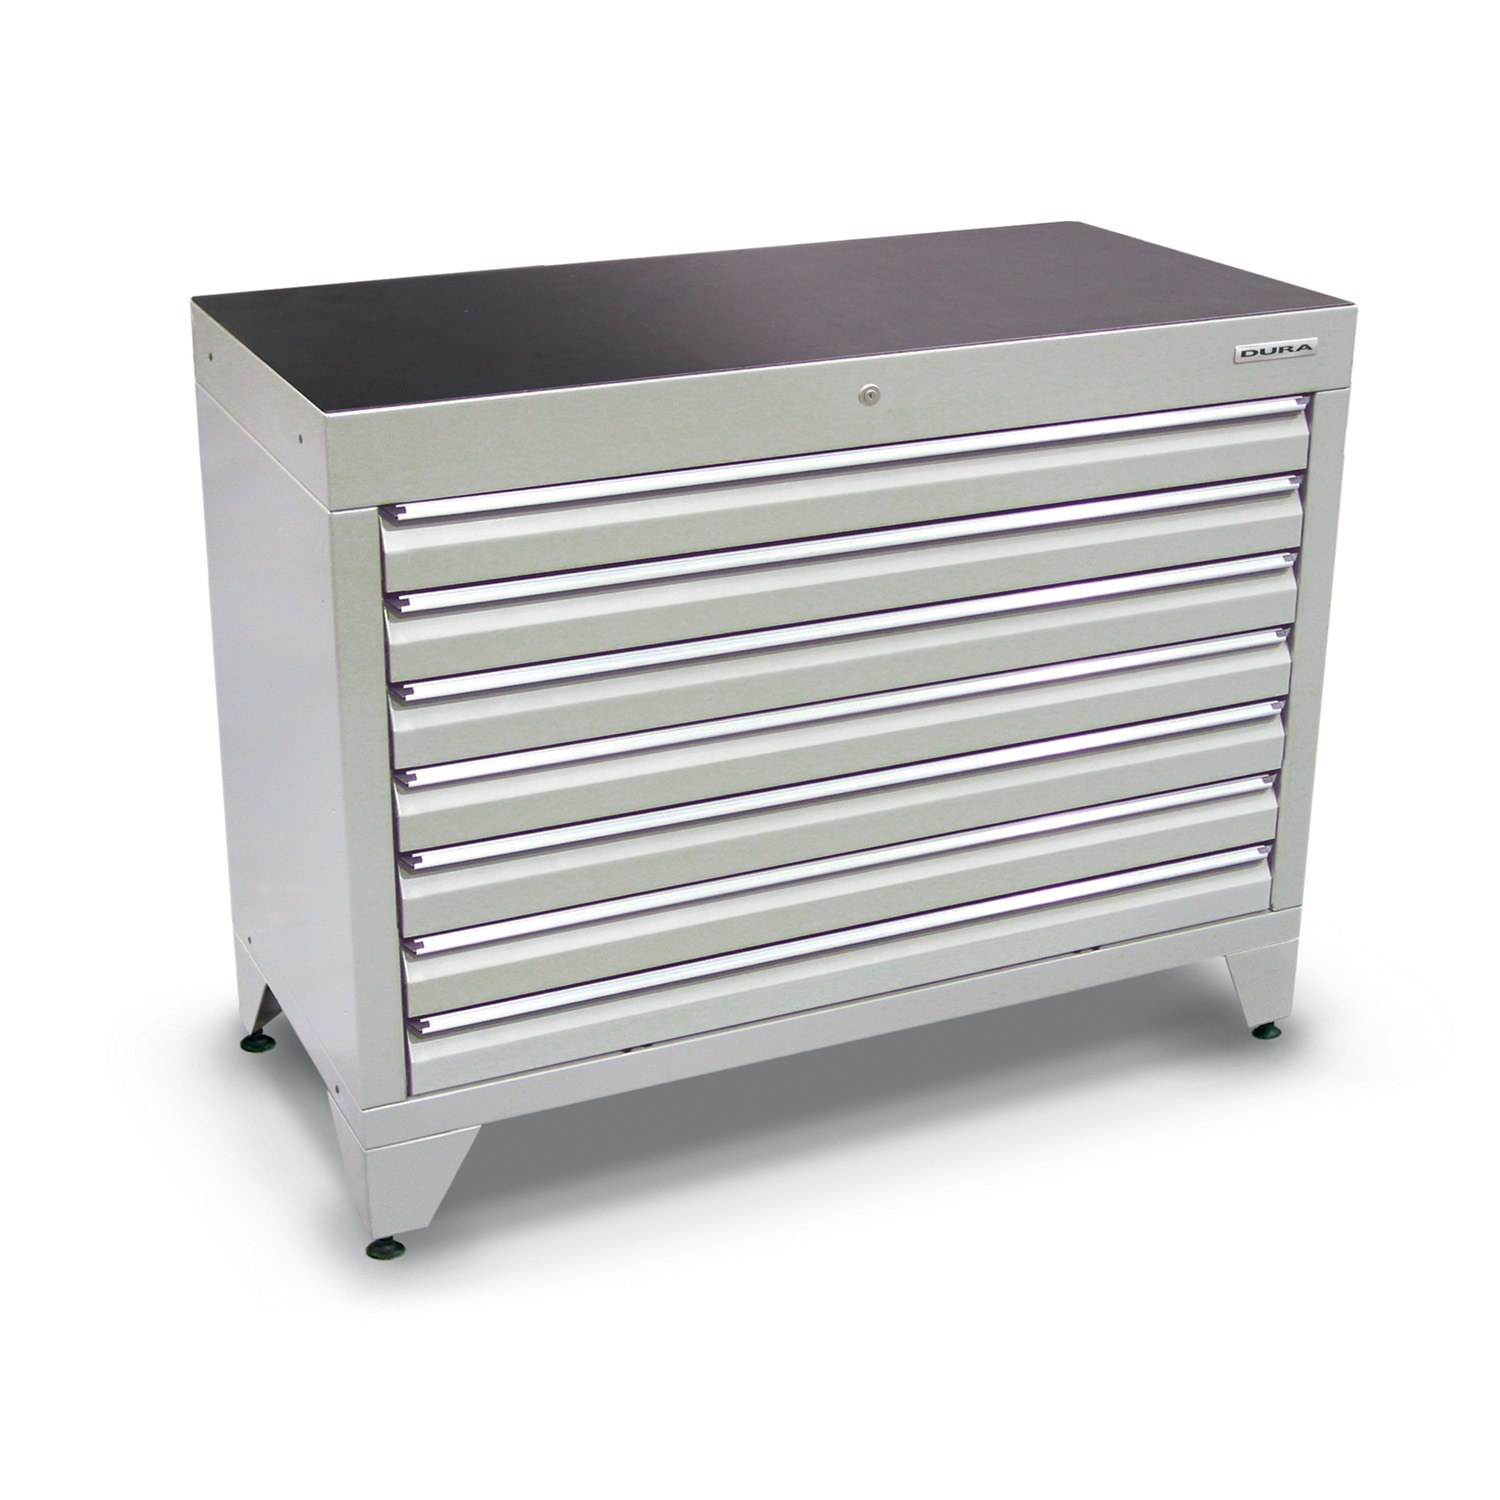 1200 series cabinet with 7 drawers (medium) and feet